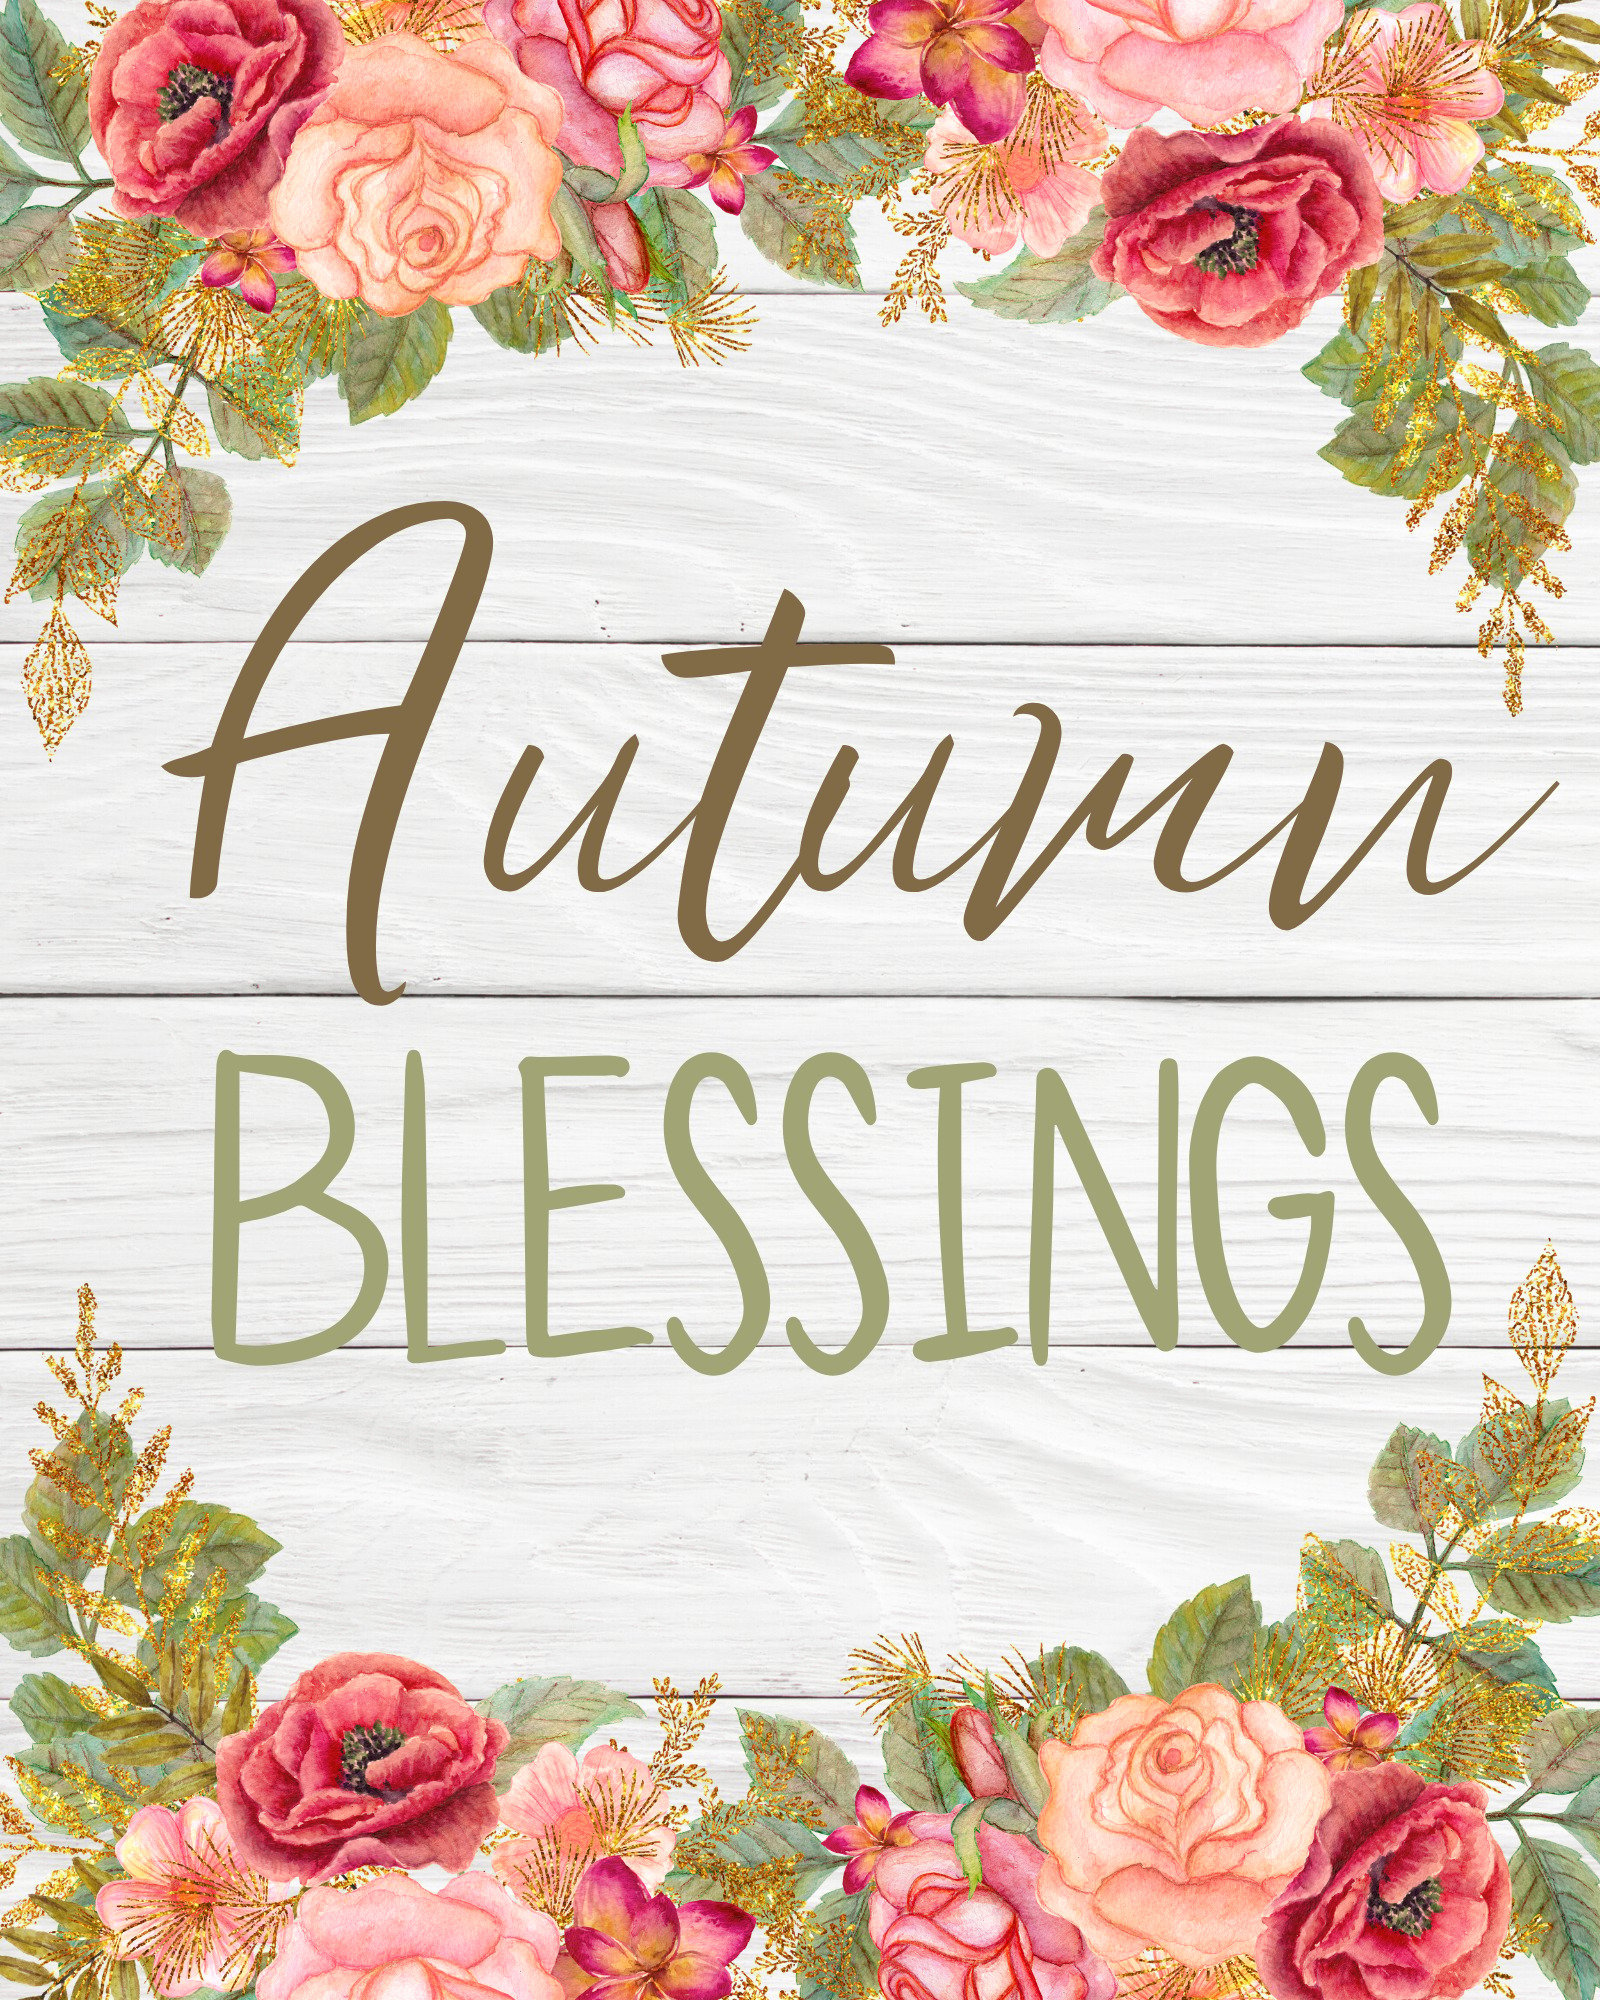 Floral Autumn Blessings